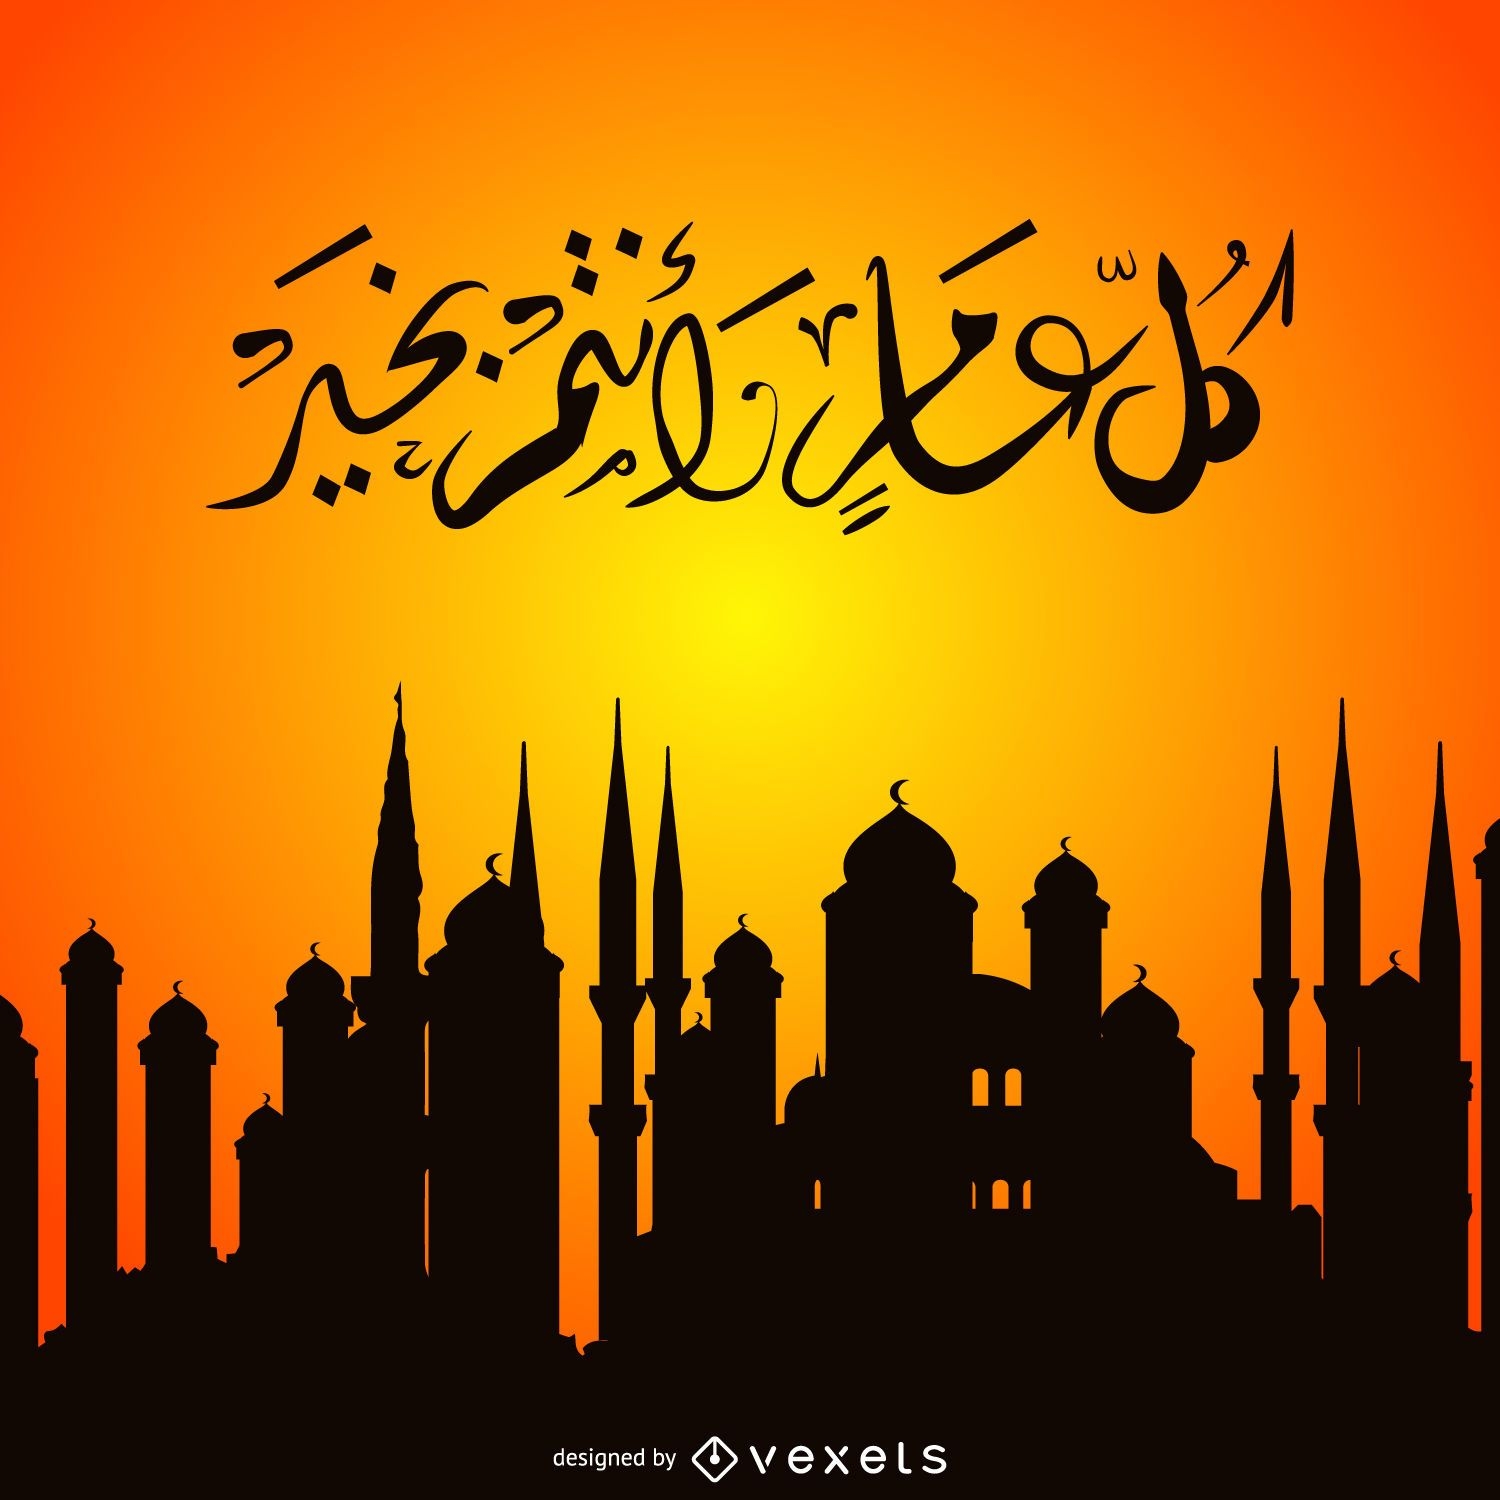 Mosque silhouette with arabic calligraphy